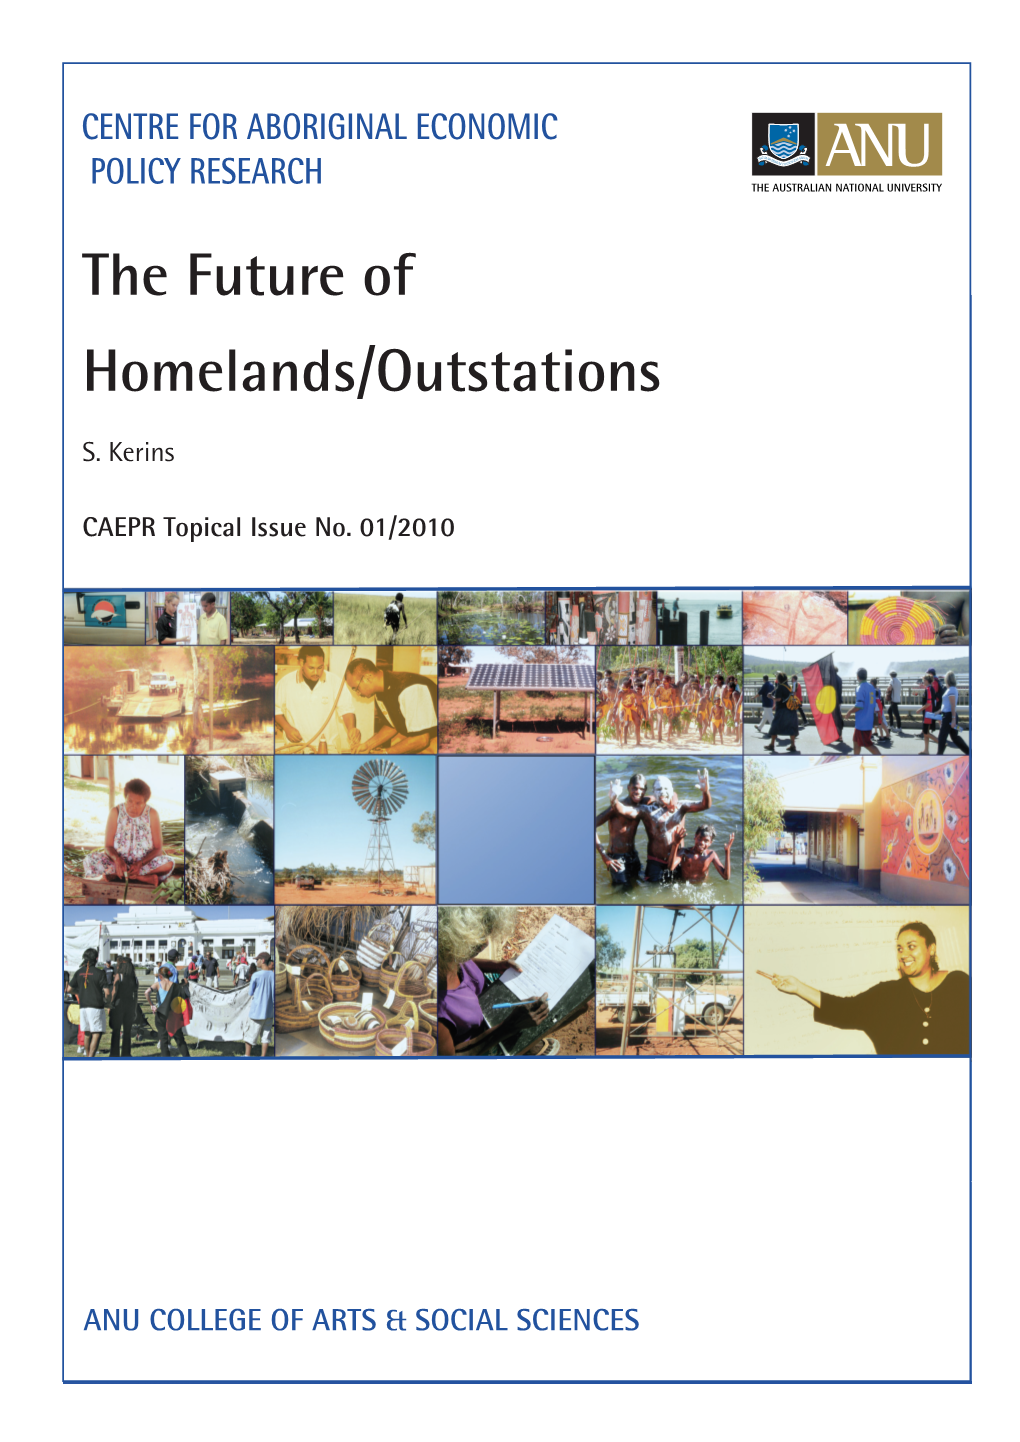 The Future of Homelands/Outstations